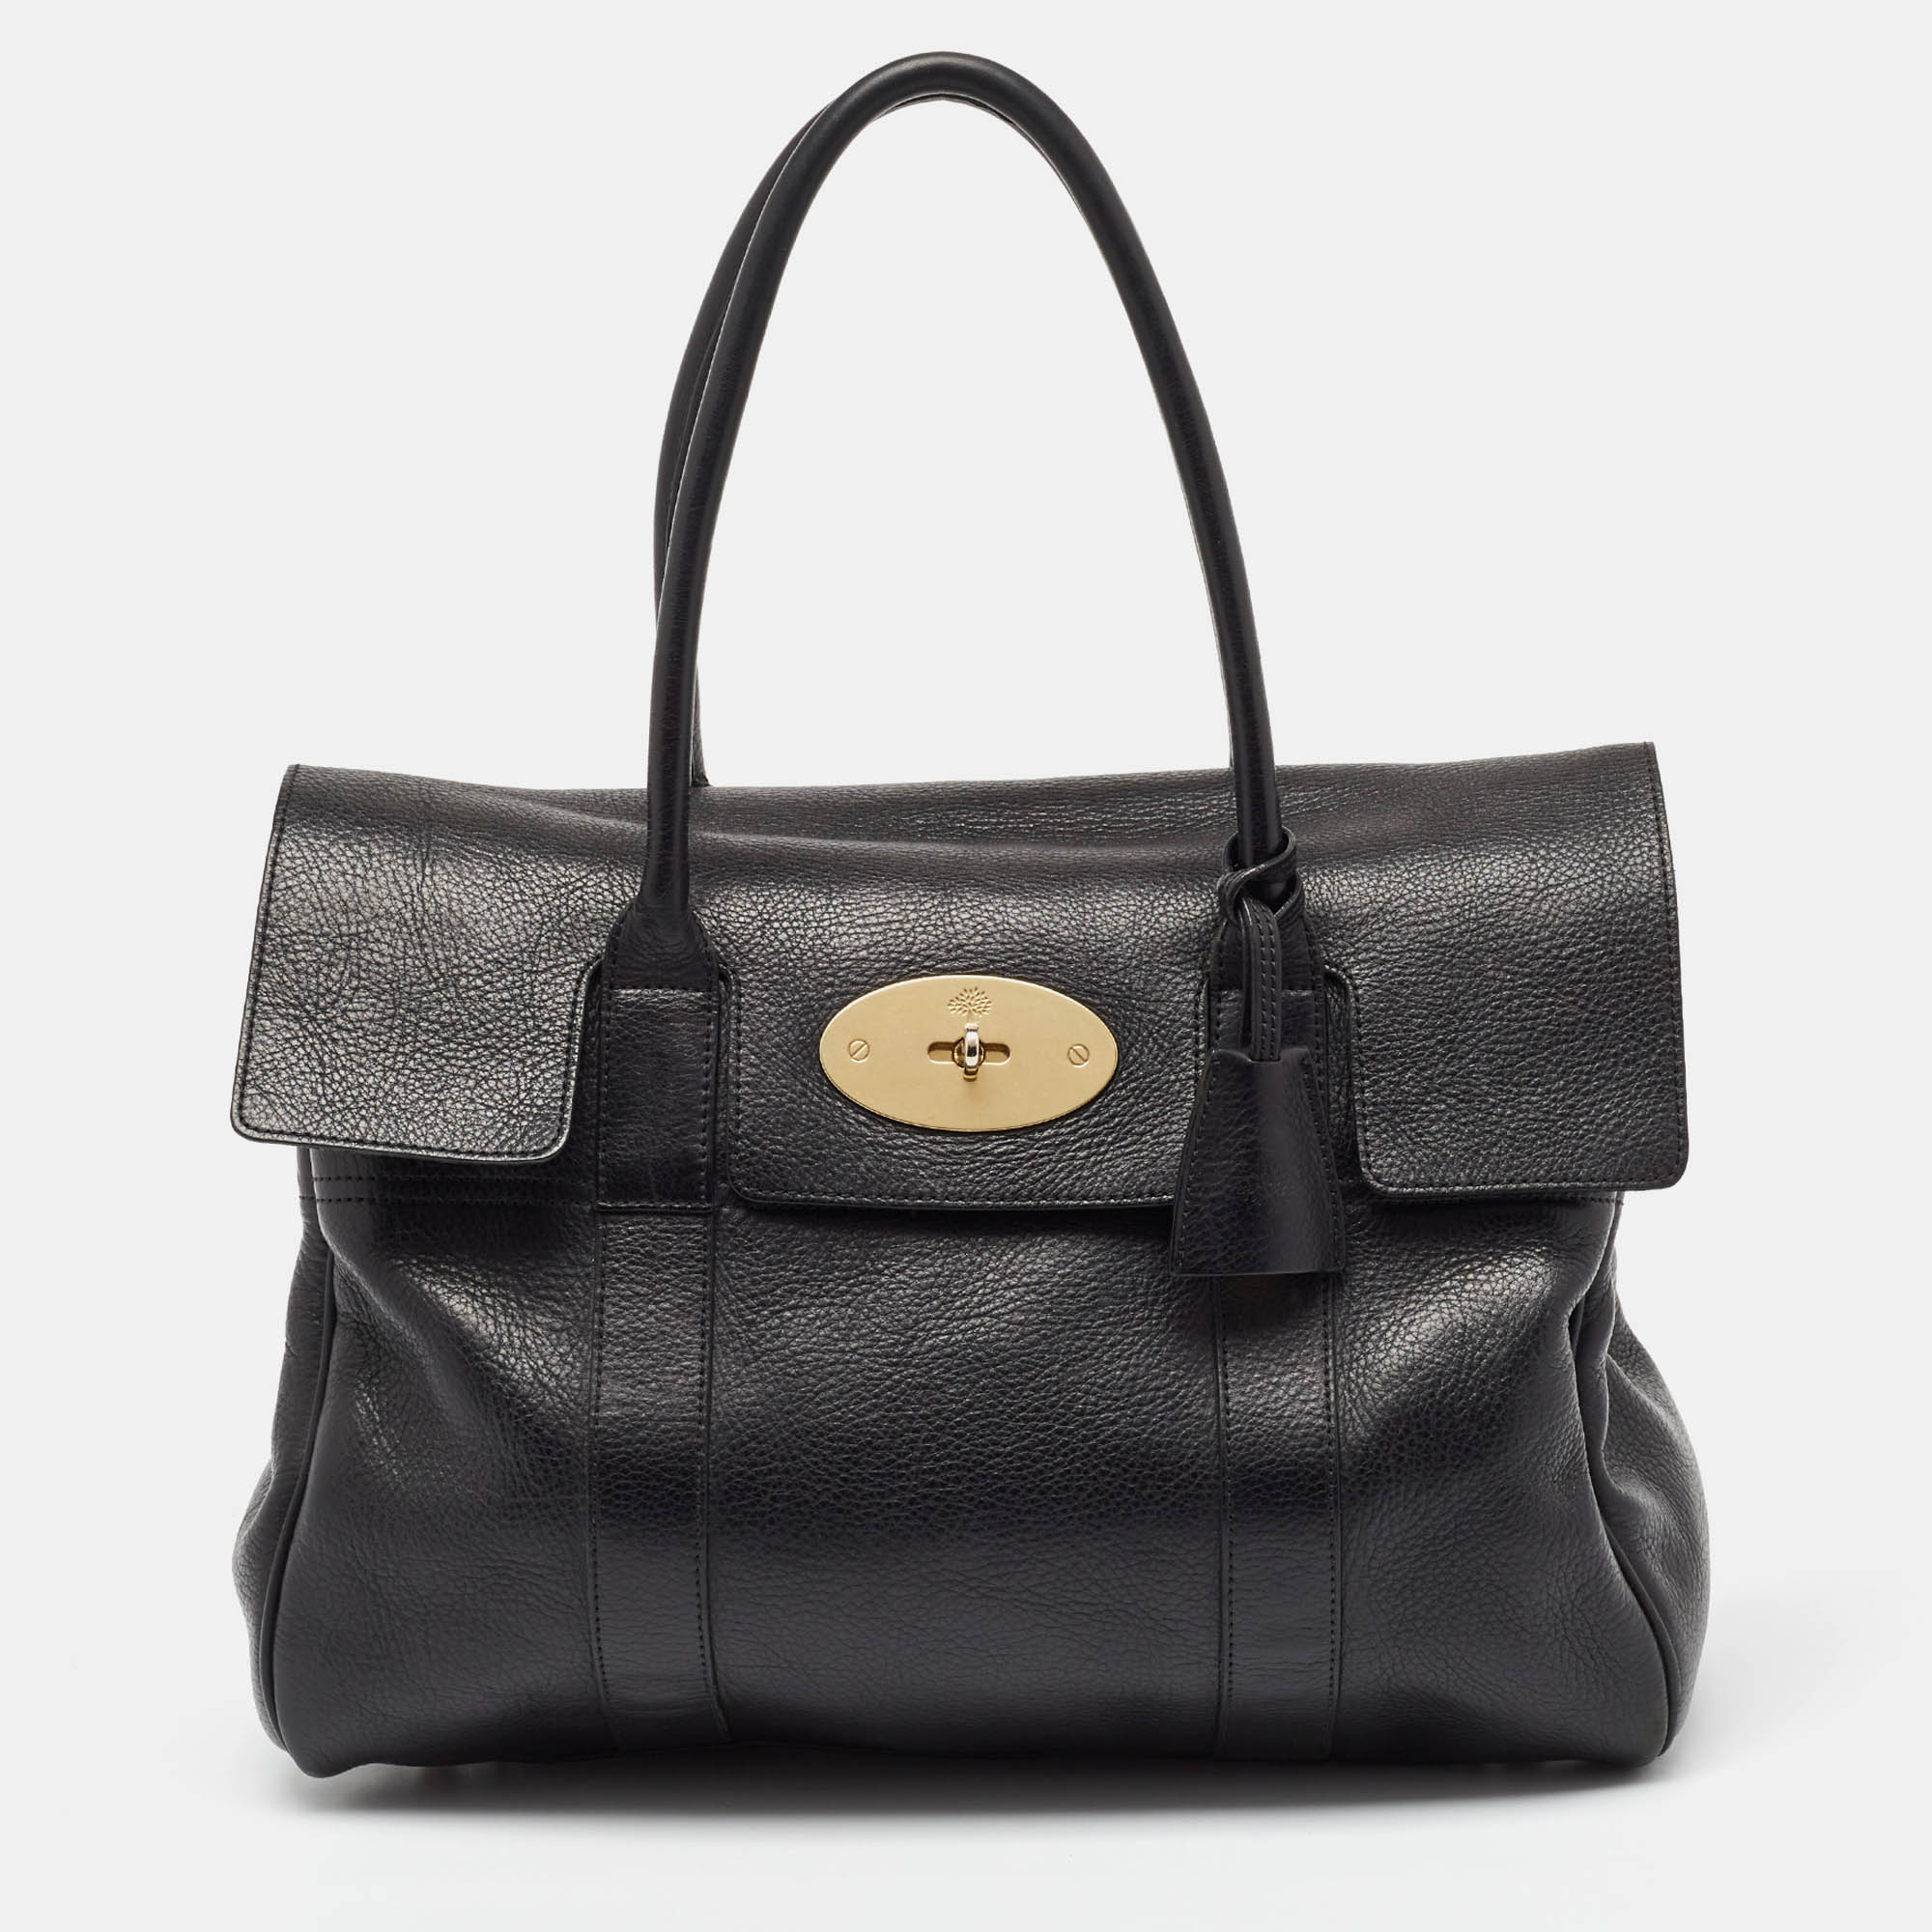 

Mulberry Black Leather Bayswater Satchel